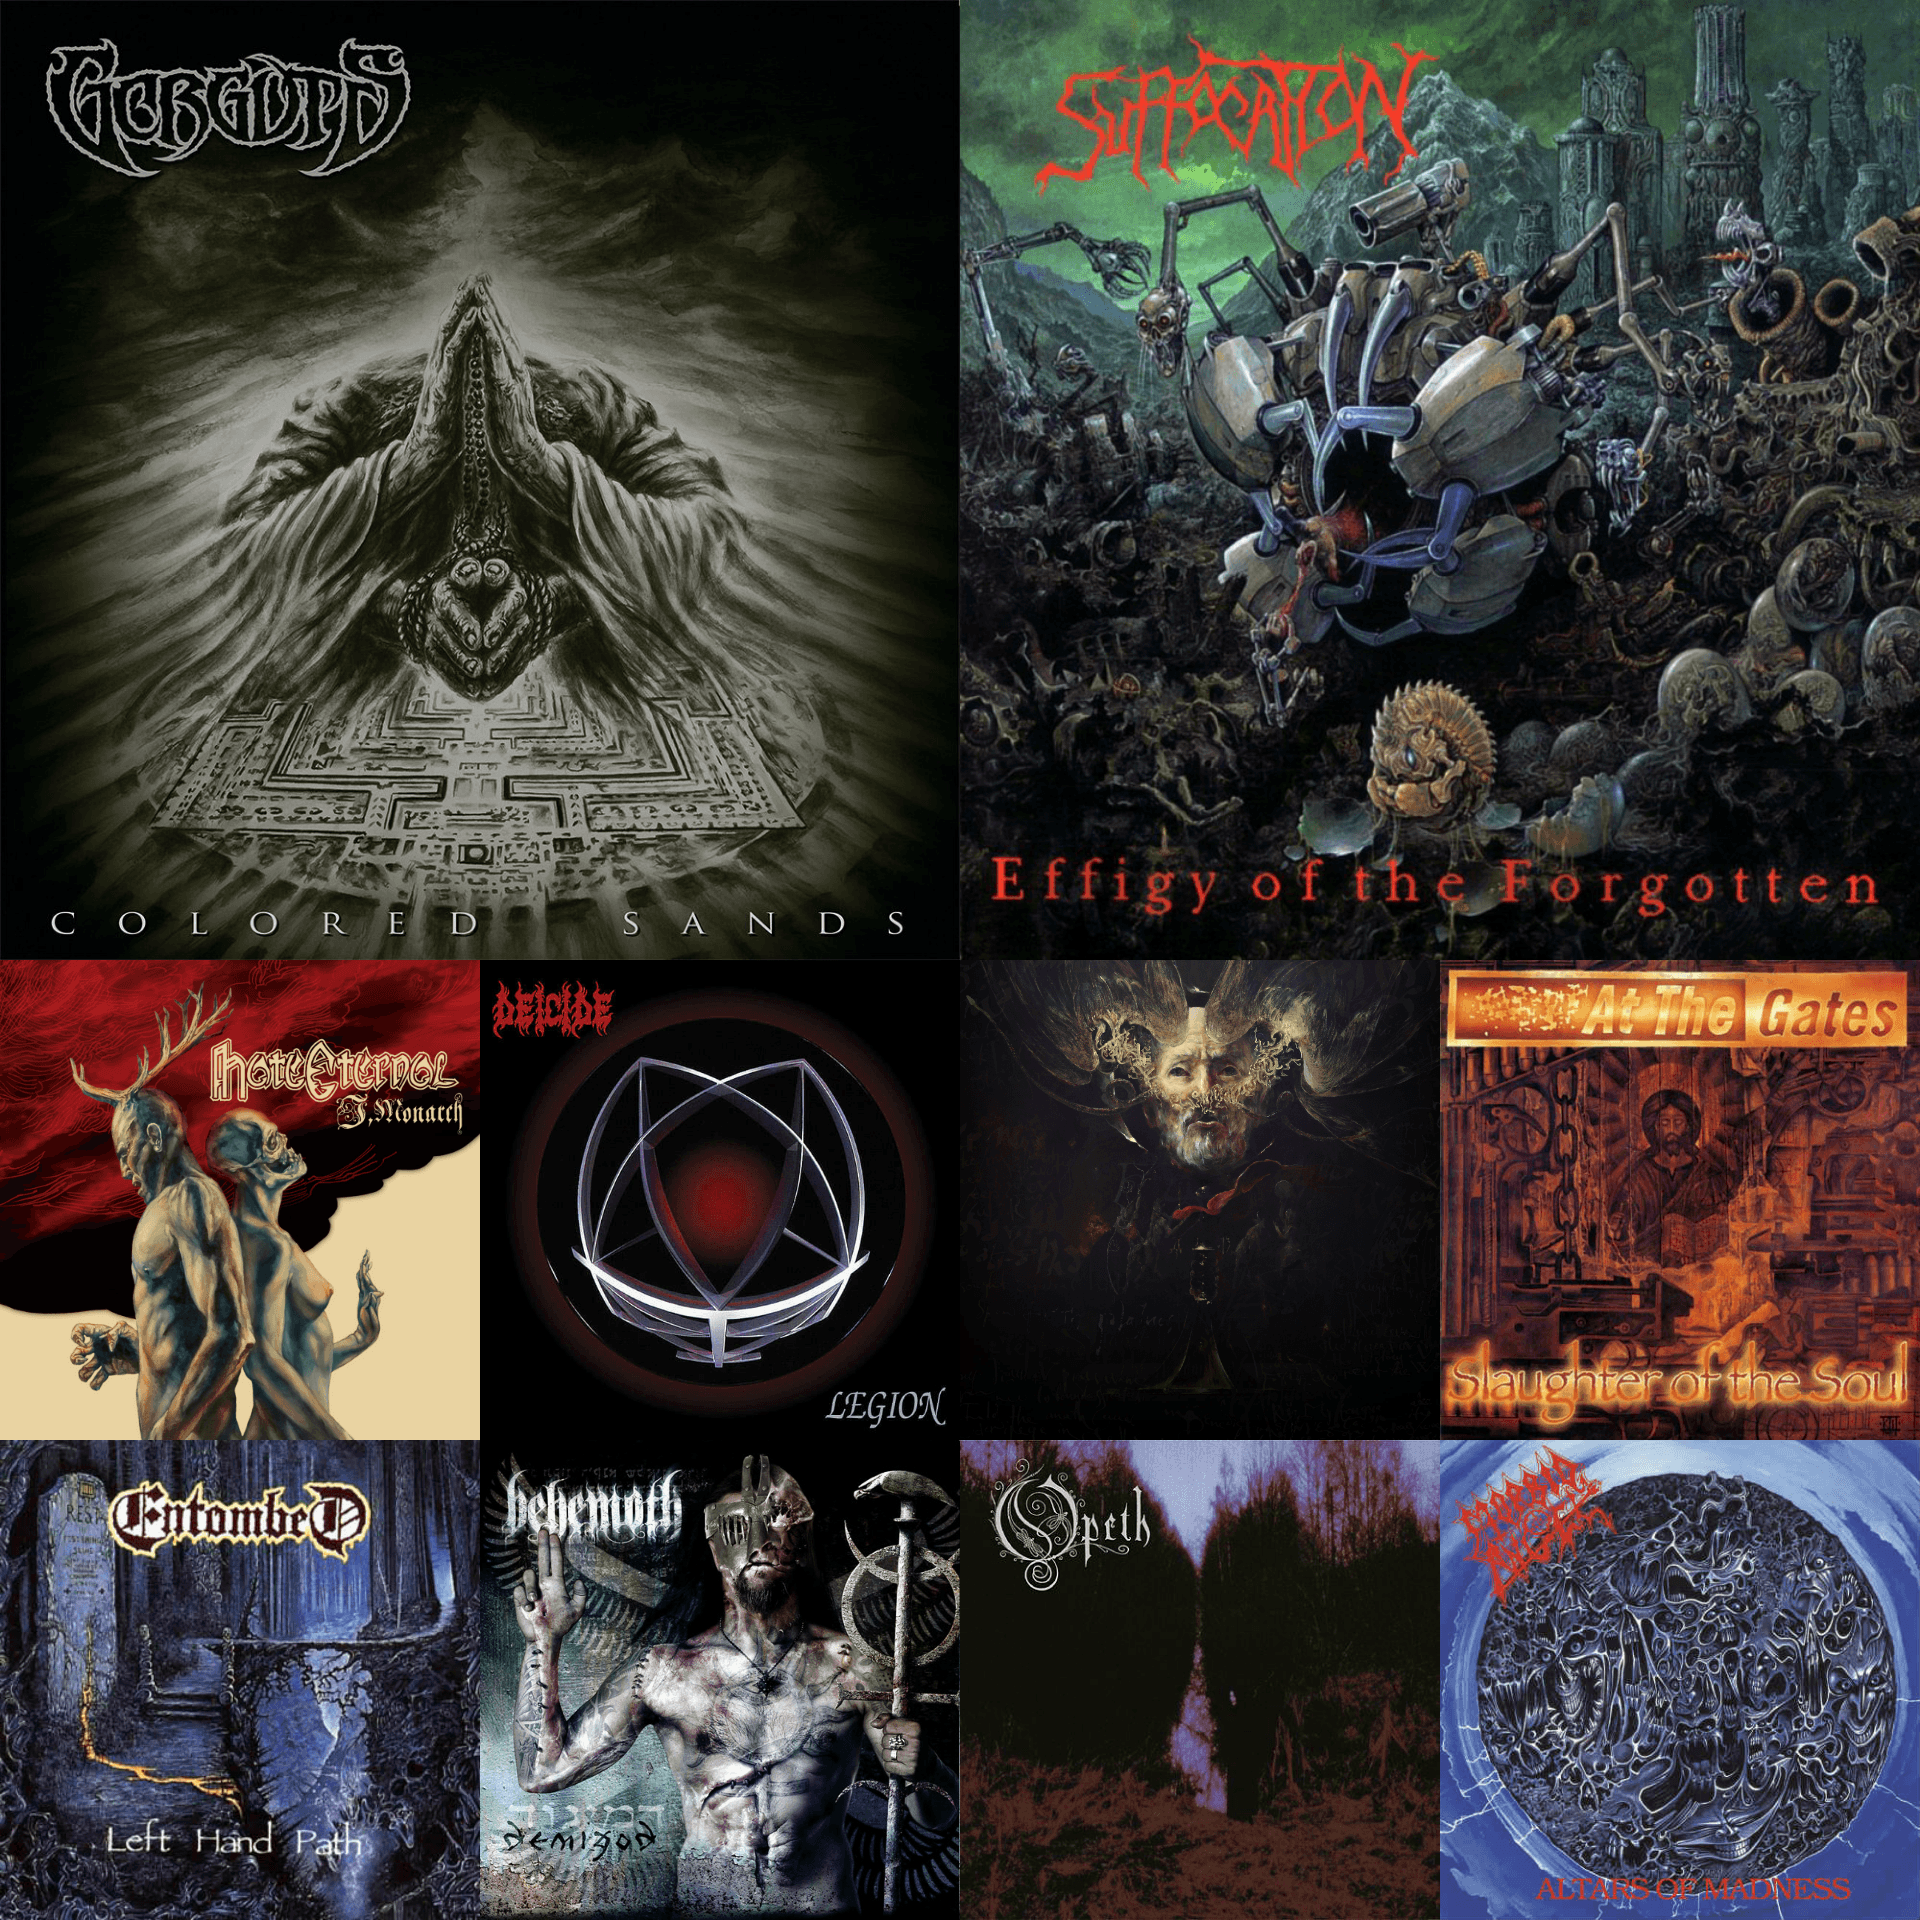 How To Death Metal: The 7 or 8 Death Metal Bands That Are